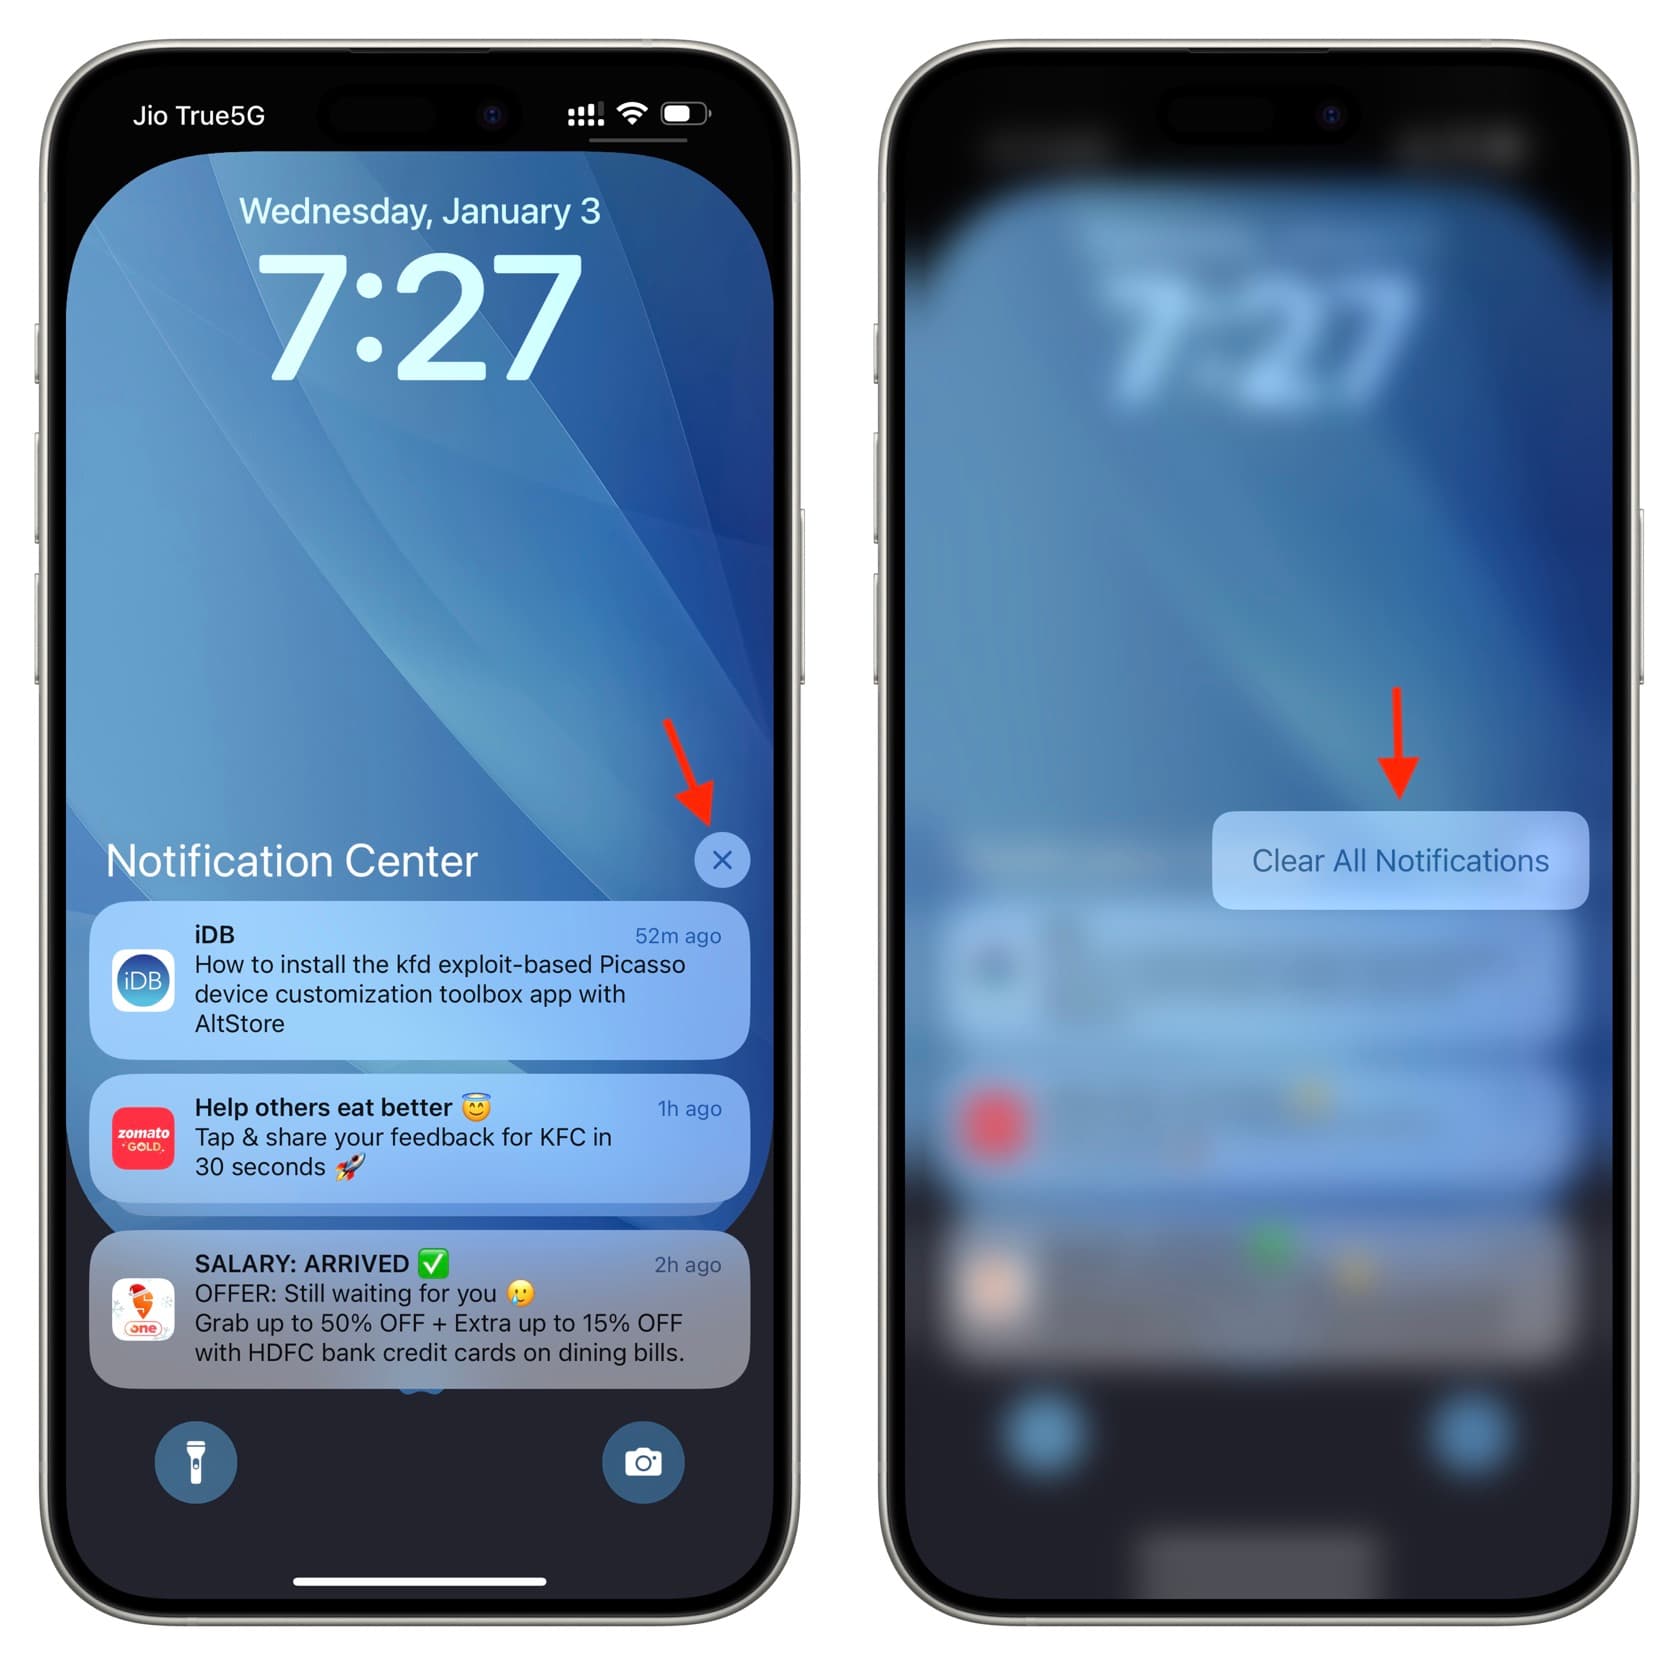 Clear All Notifications in iPhone Notification Center